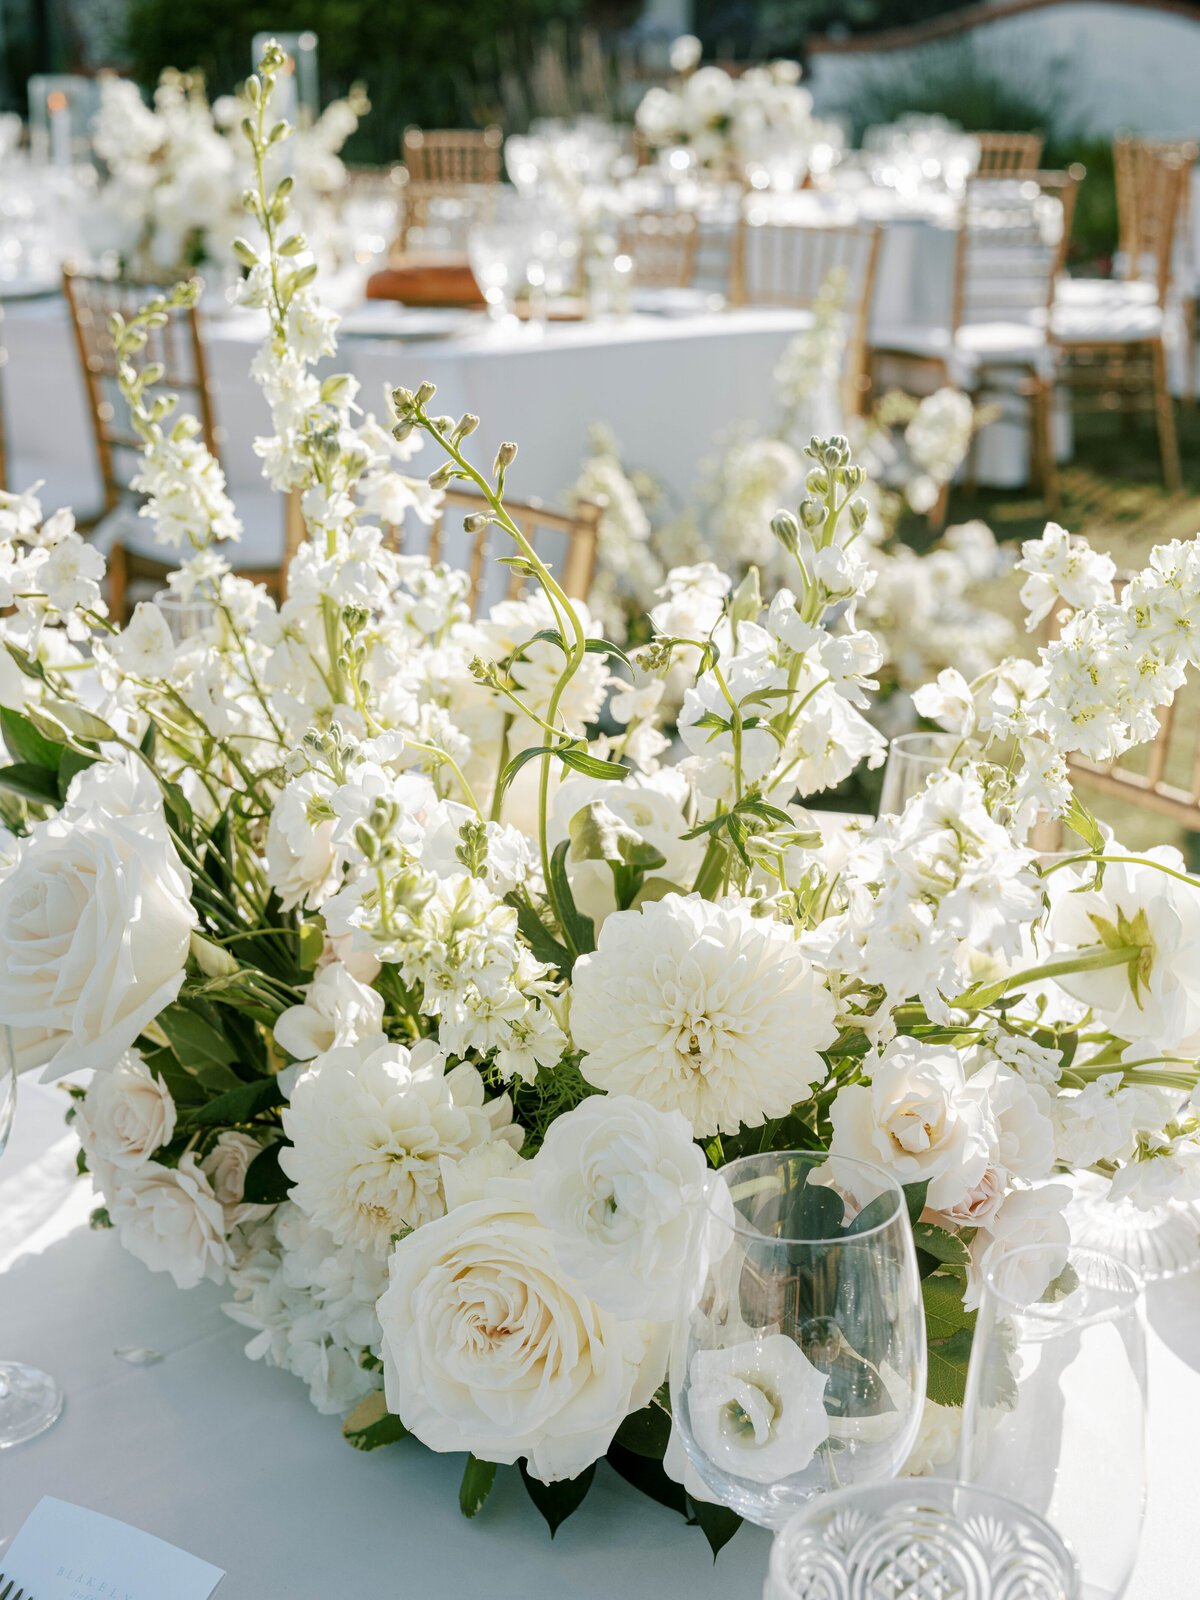 These large white flower arrangements hold the attention of guests while placed in the center of the tables.